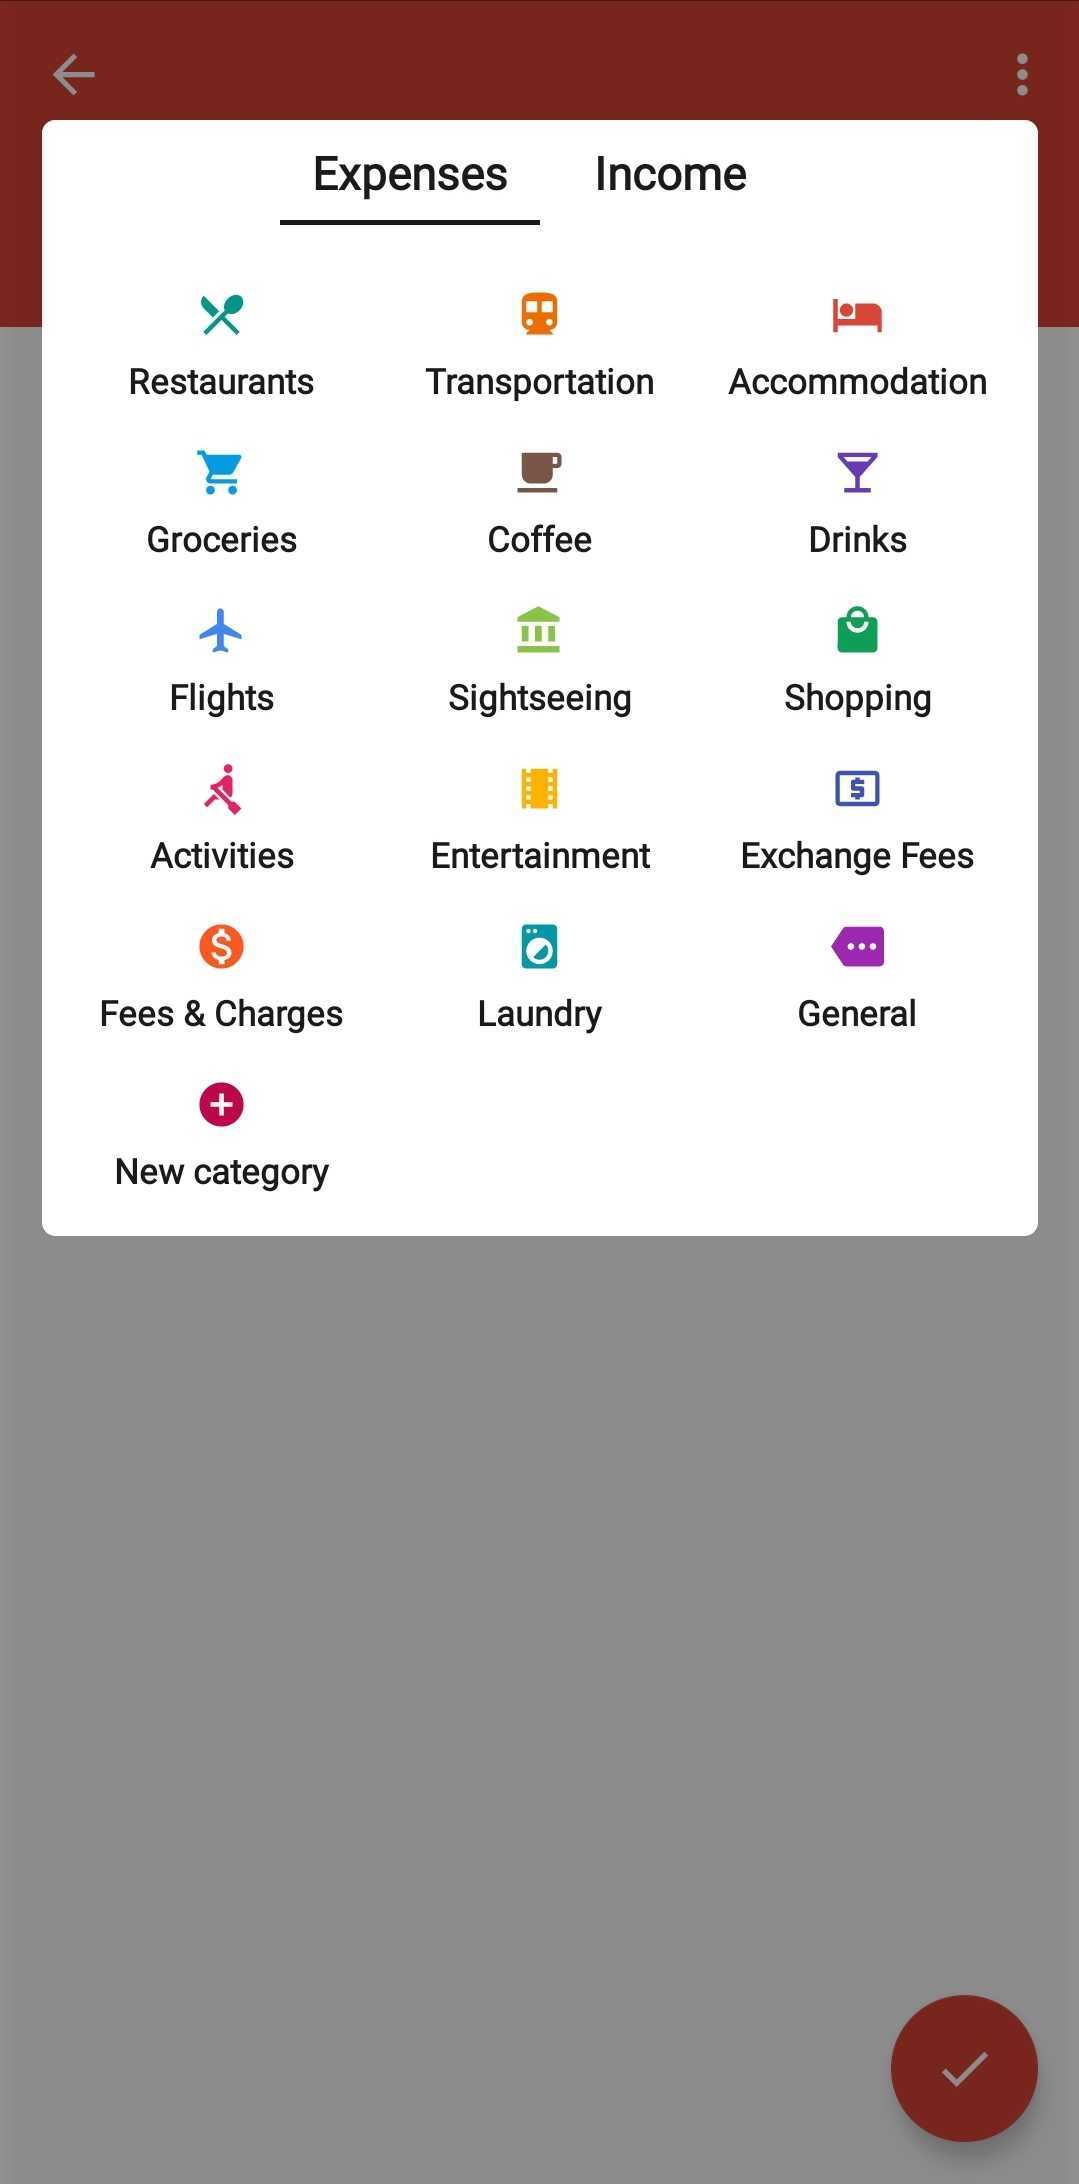 expenses image on the TravelSpend app

